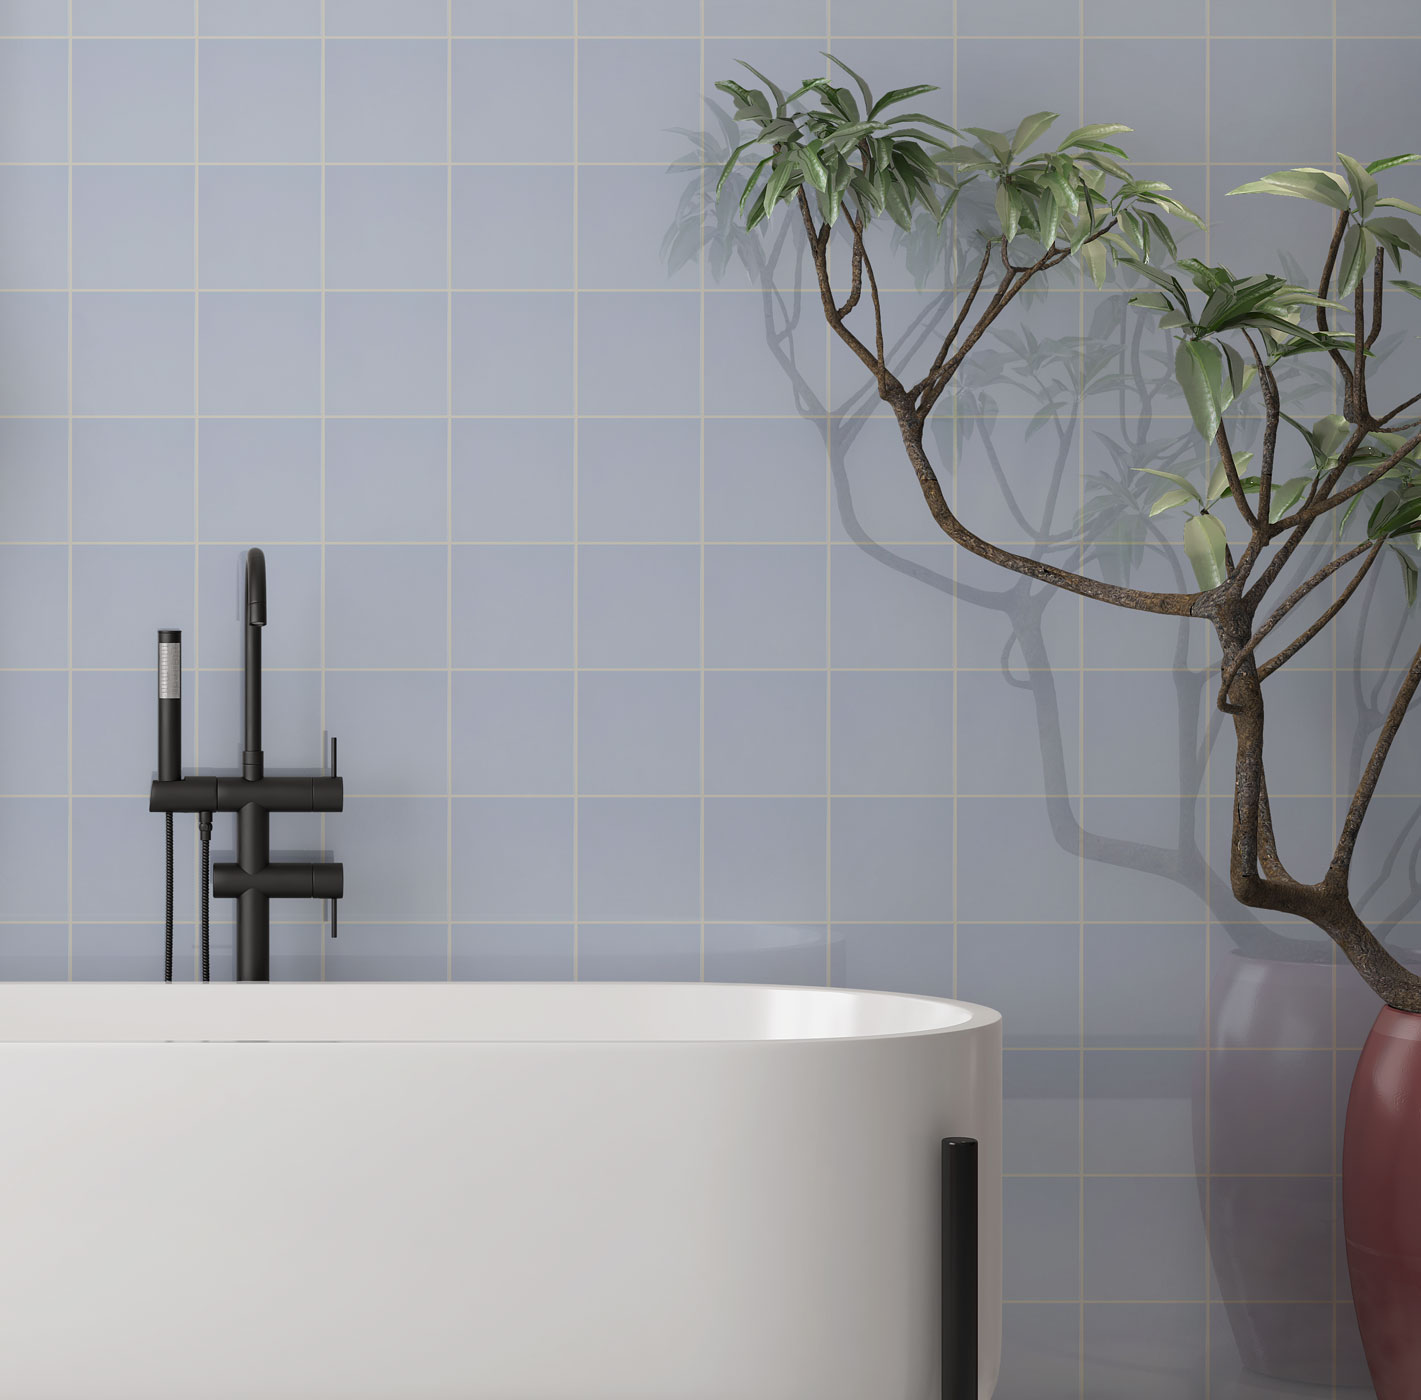 Johnsons Prismatics Square Gloss Harebell Blue Tiles used in a small bathroom with a house plant